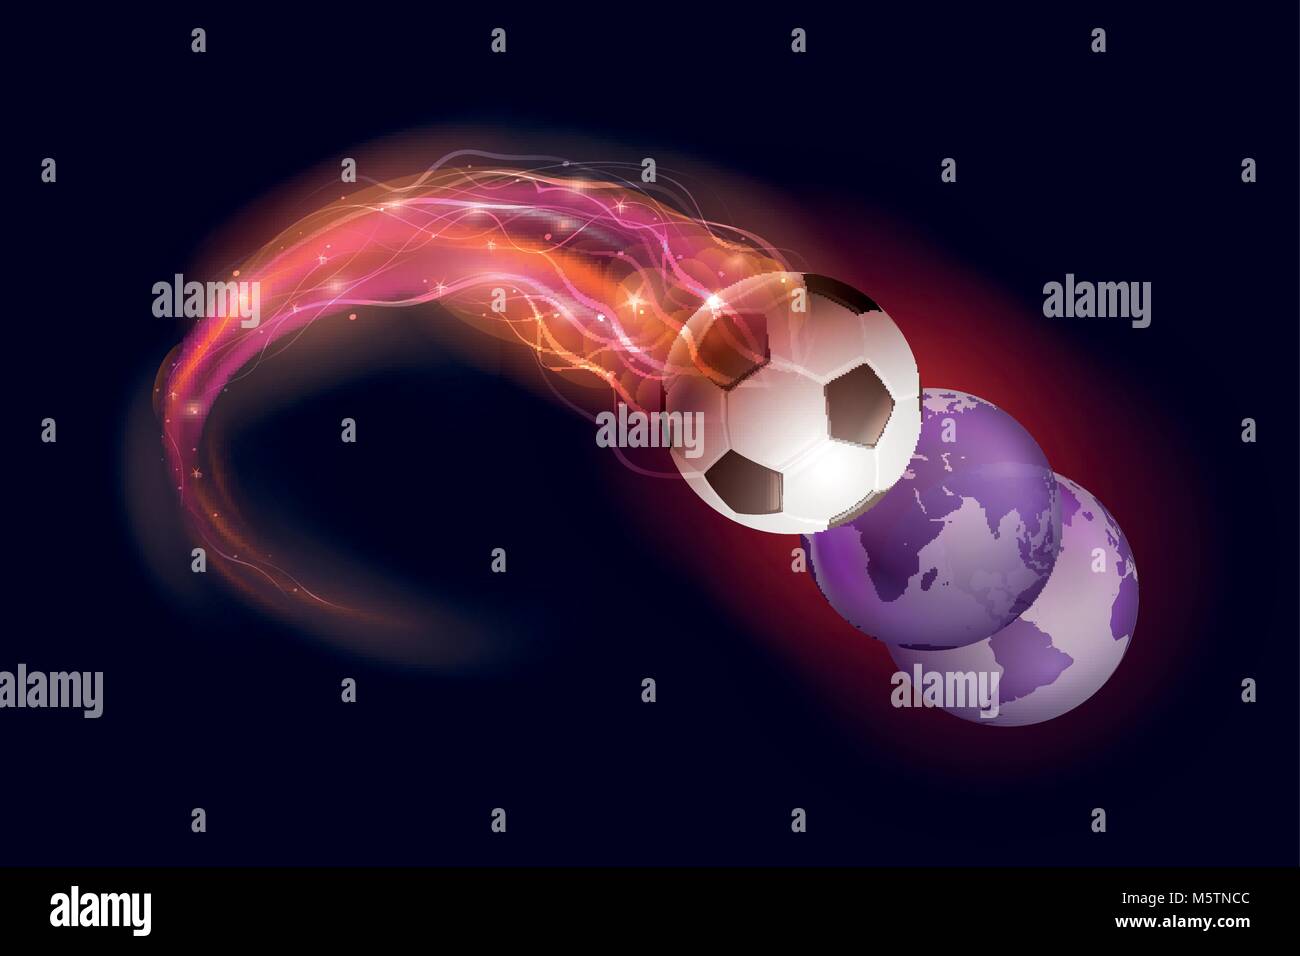 Soccer ball in flames and lights on black background. World Cup 2018 concept vector illustration. Stock Vector